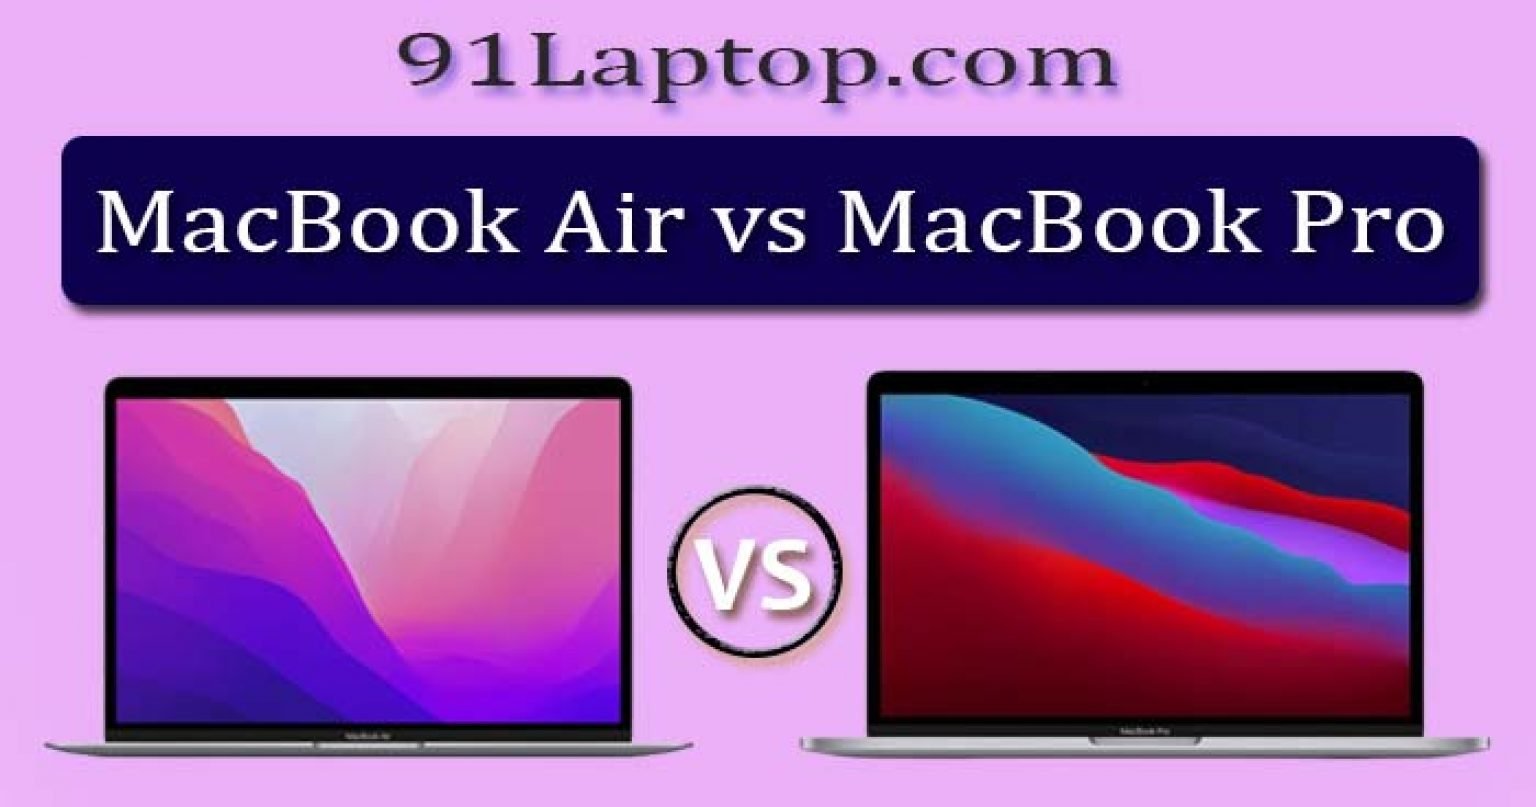 Macbook Air VS Macbook Pro Which One You Should Buy? 91Laptop